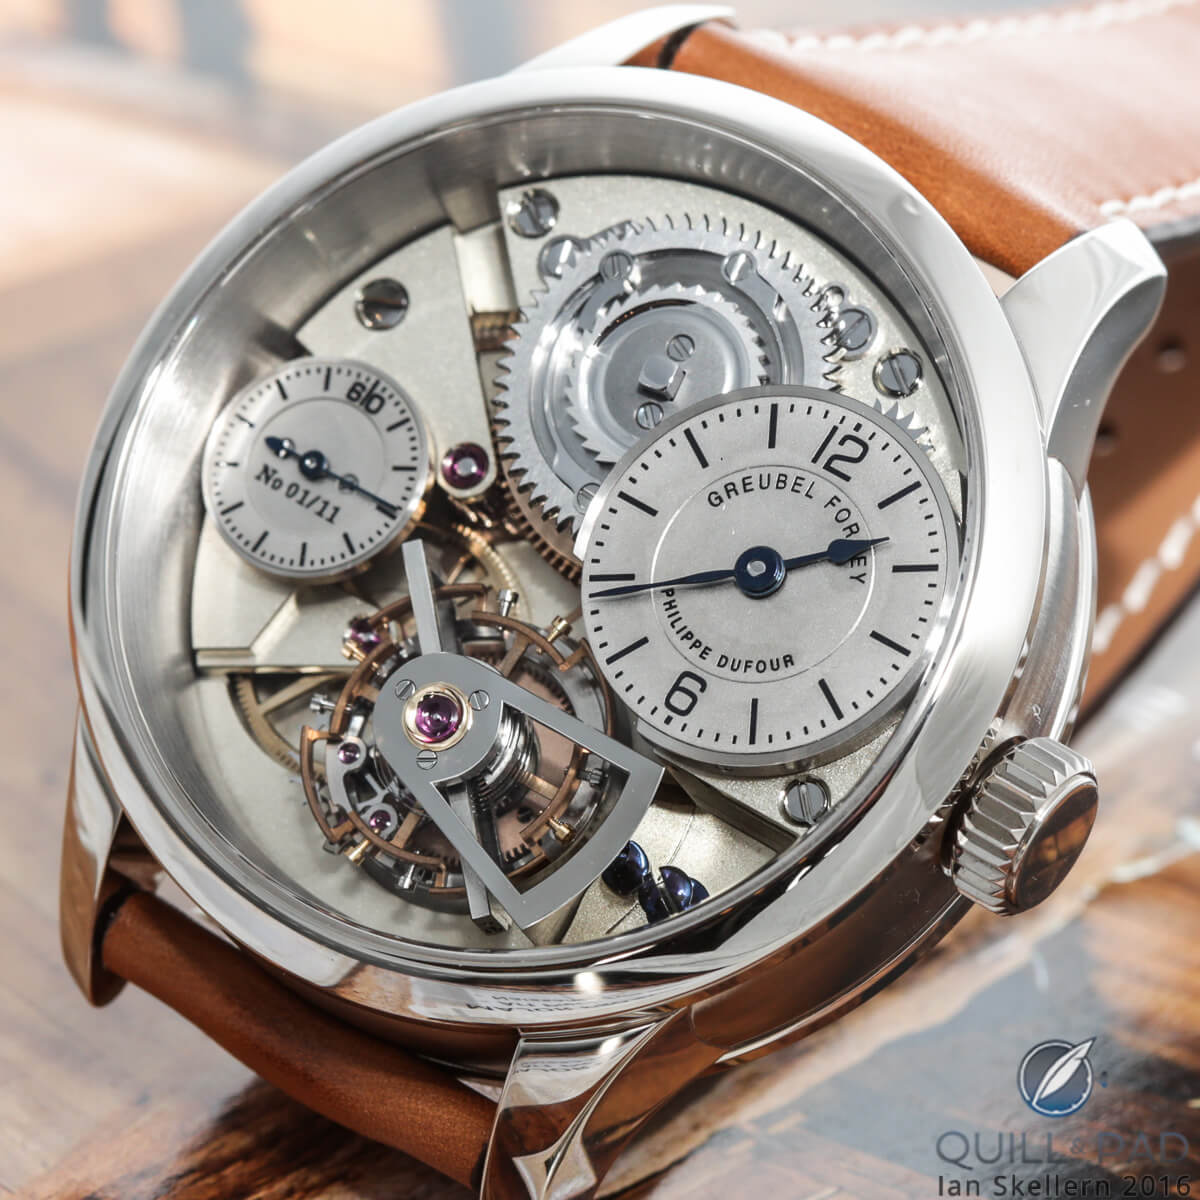 No longer a prototype, the production version of Naissance d’Une Montre, Le Garde Temps on display at SIHH 2016